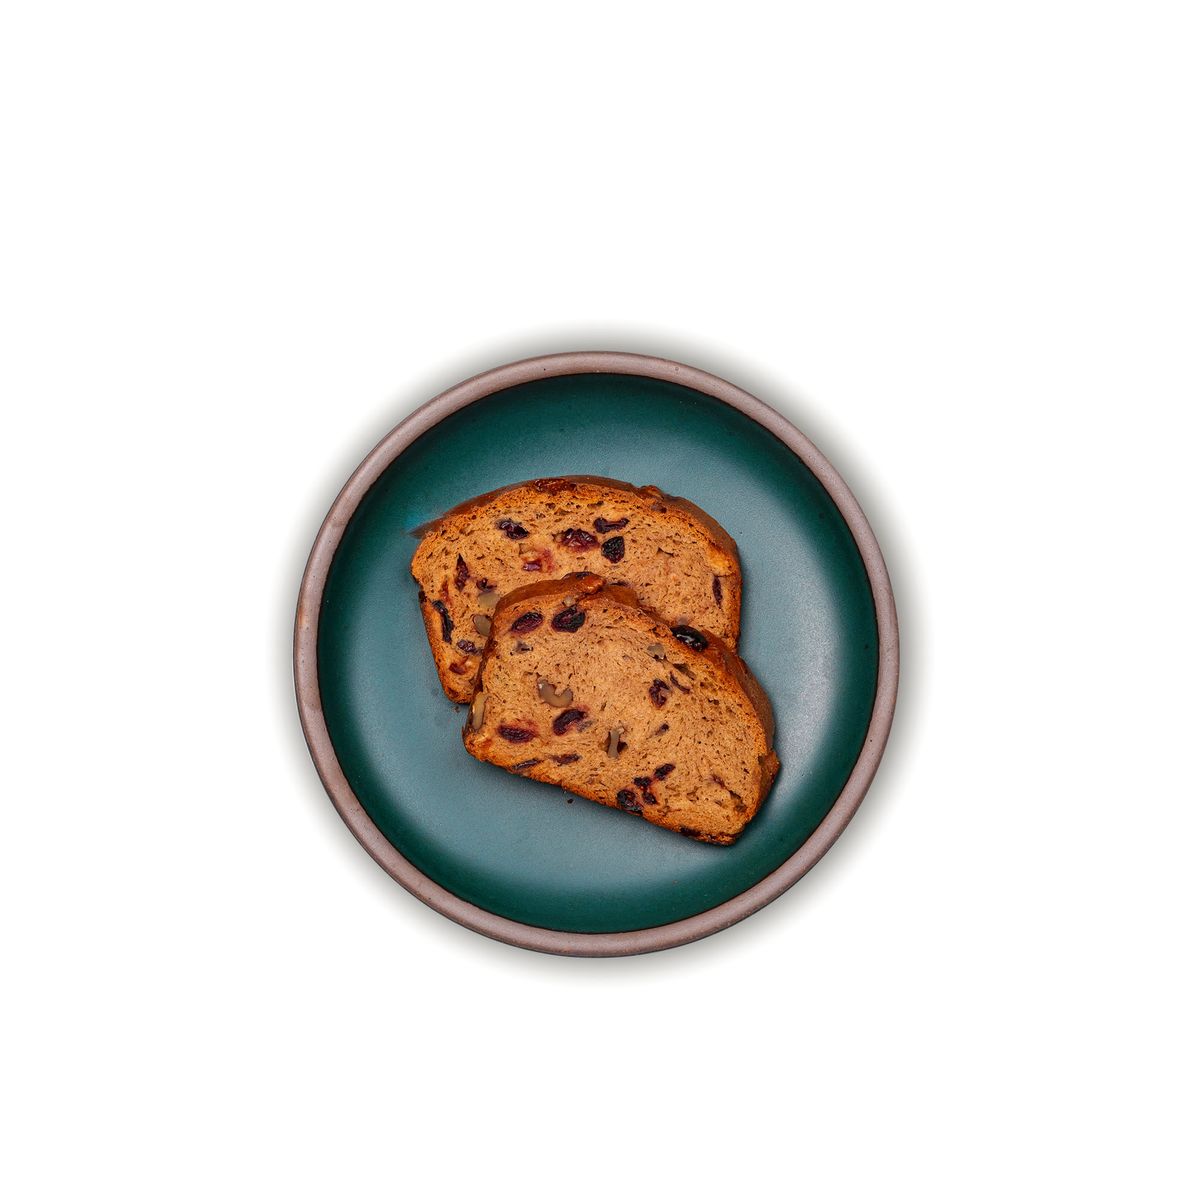 Two raisin bread slices on a medium sized ceramic plate in a deep dark teal color featuring iron speckles and an unglazed rim.